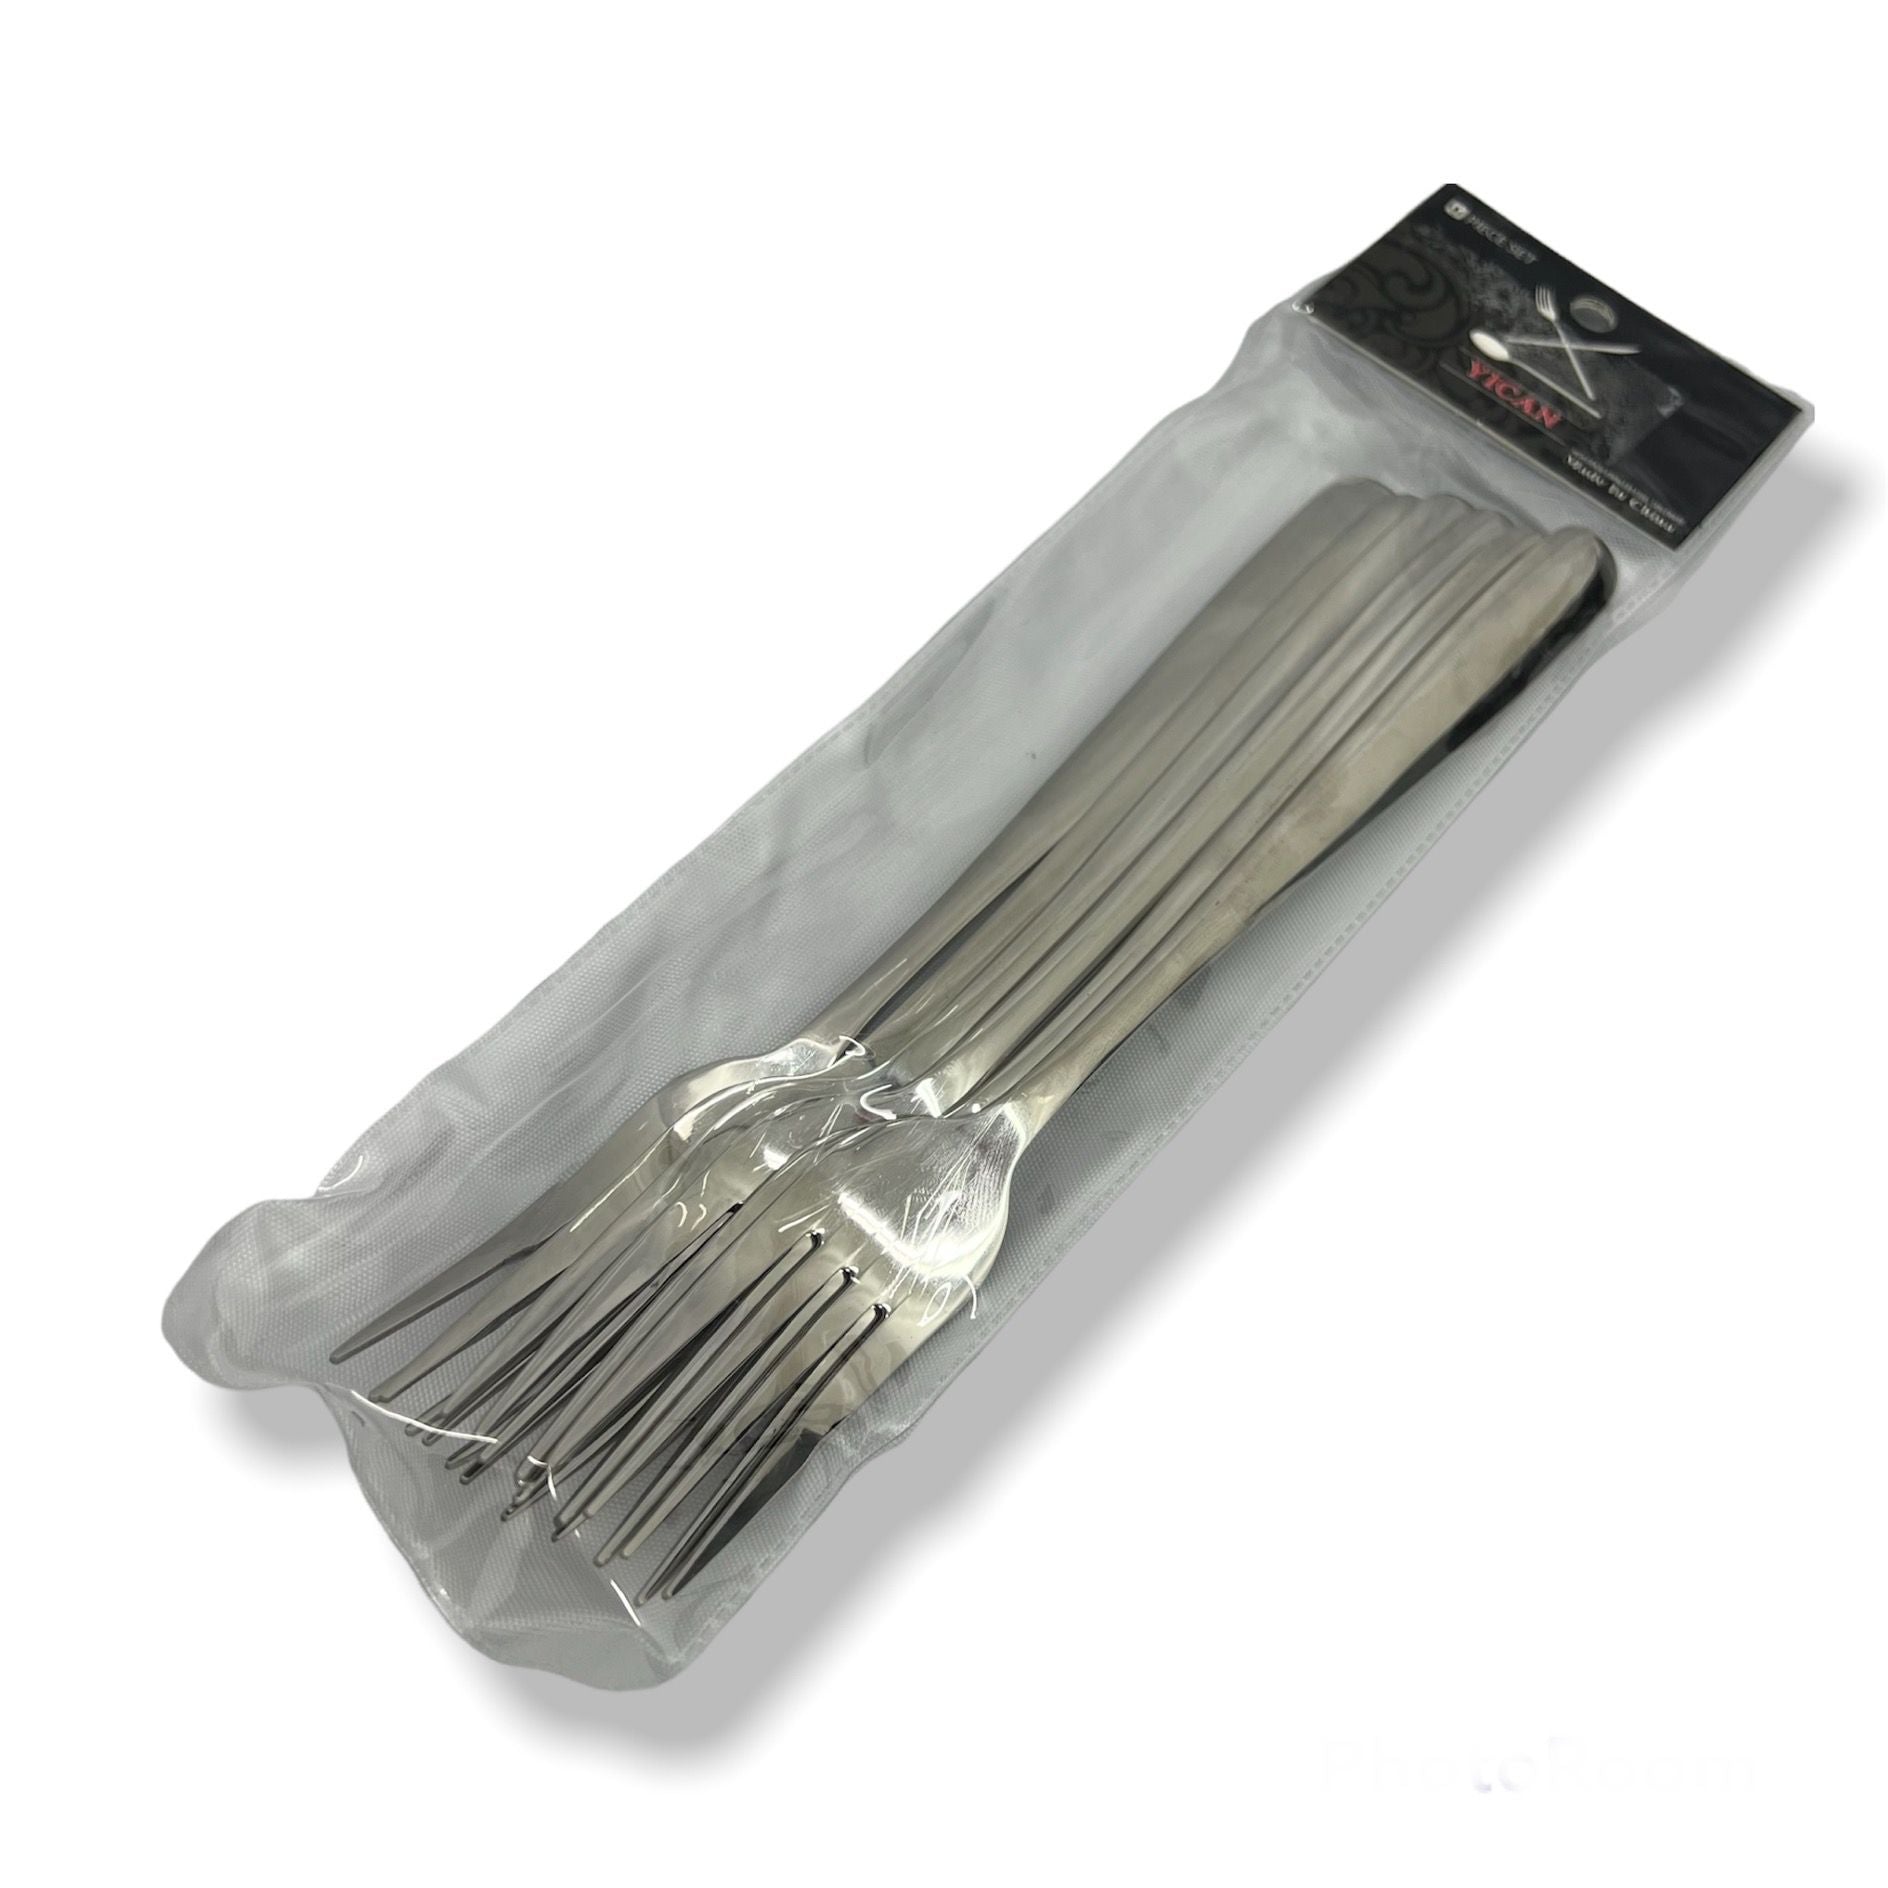 YICAN High Grade Stainless Steel Fork 6 Piece Set